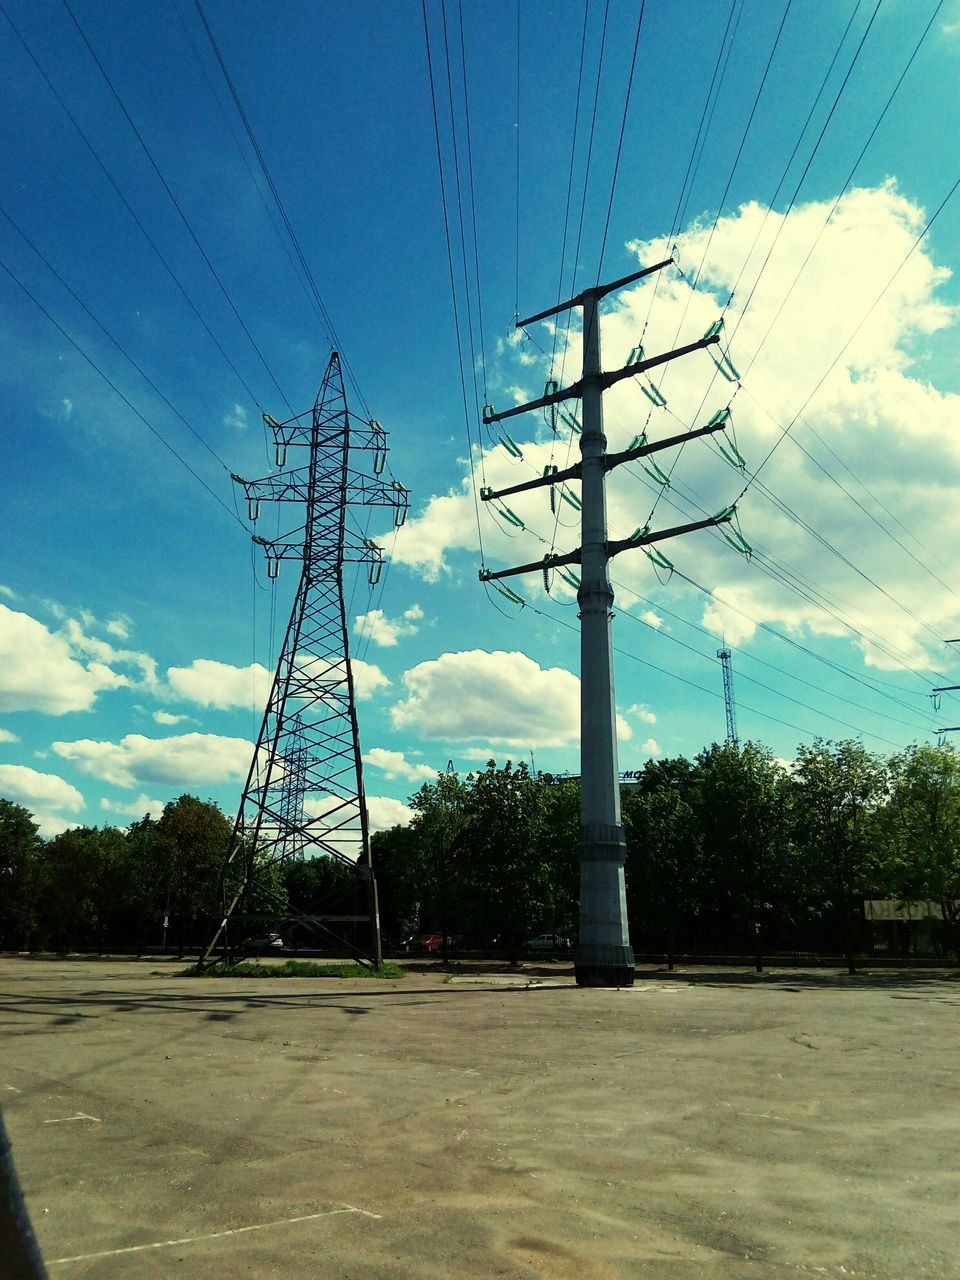 sky, power line, electricity pylon, power supply, electricity, cloud - sky, blue, low angle view, tree, cable, cloud, power cable, day, outdoors, cloudy, no people, nature, pole, tranquility, landscape